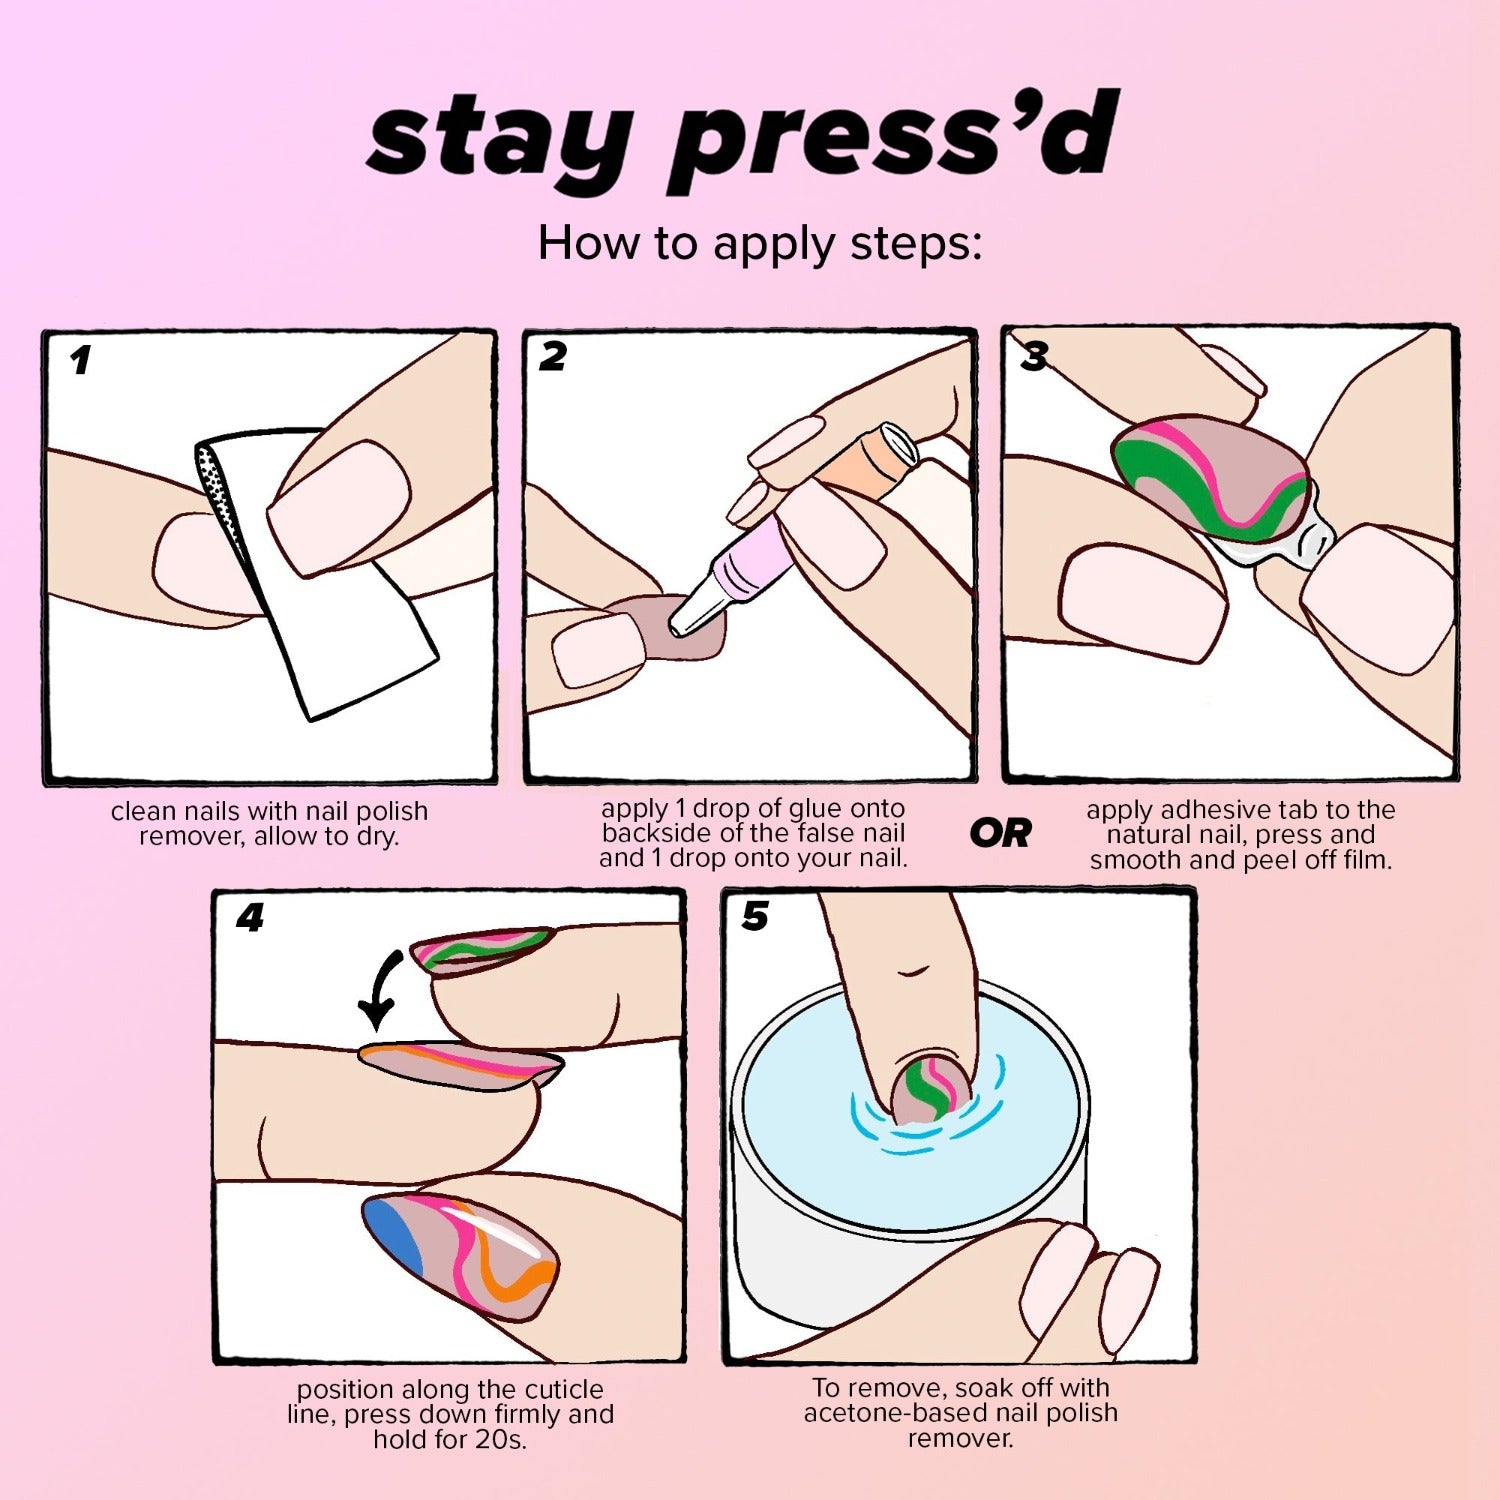 stay press'd - heart to heart